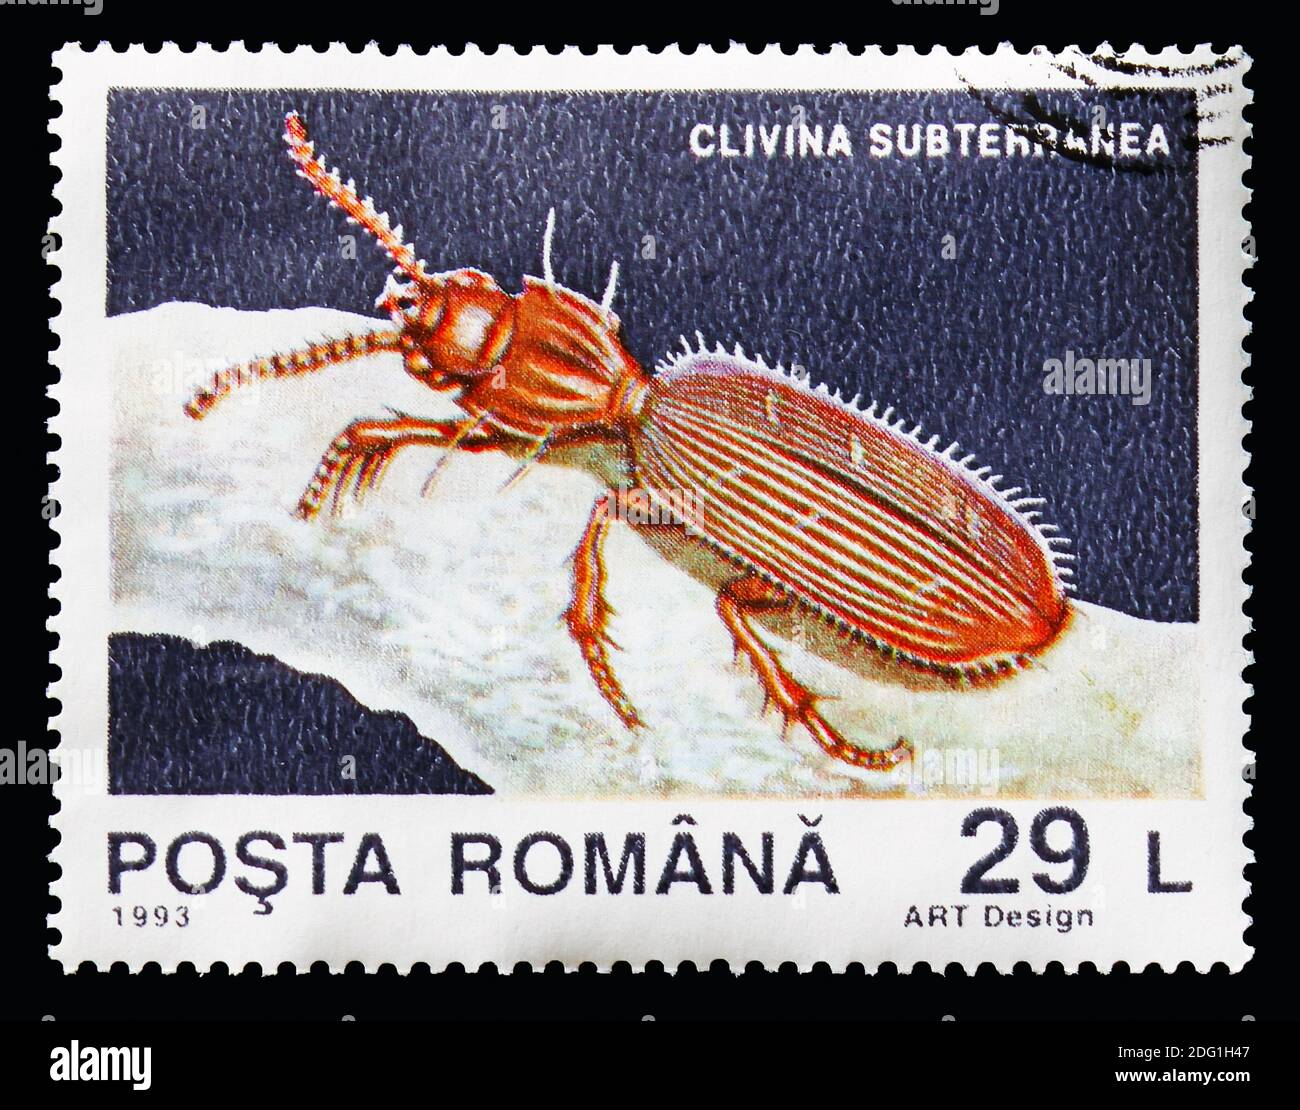 MOSCOW, RUSSIA - AUGUST 18, 2018: A stamp printed in Romania shows Ground Beetle (Clivina subterranea), Animals from the Movile Cavern serie, circa 19 Stock Photo